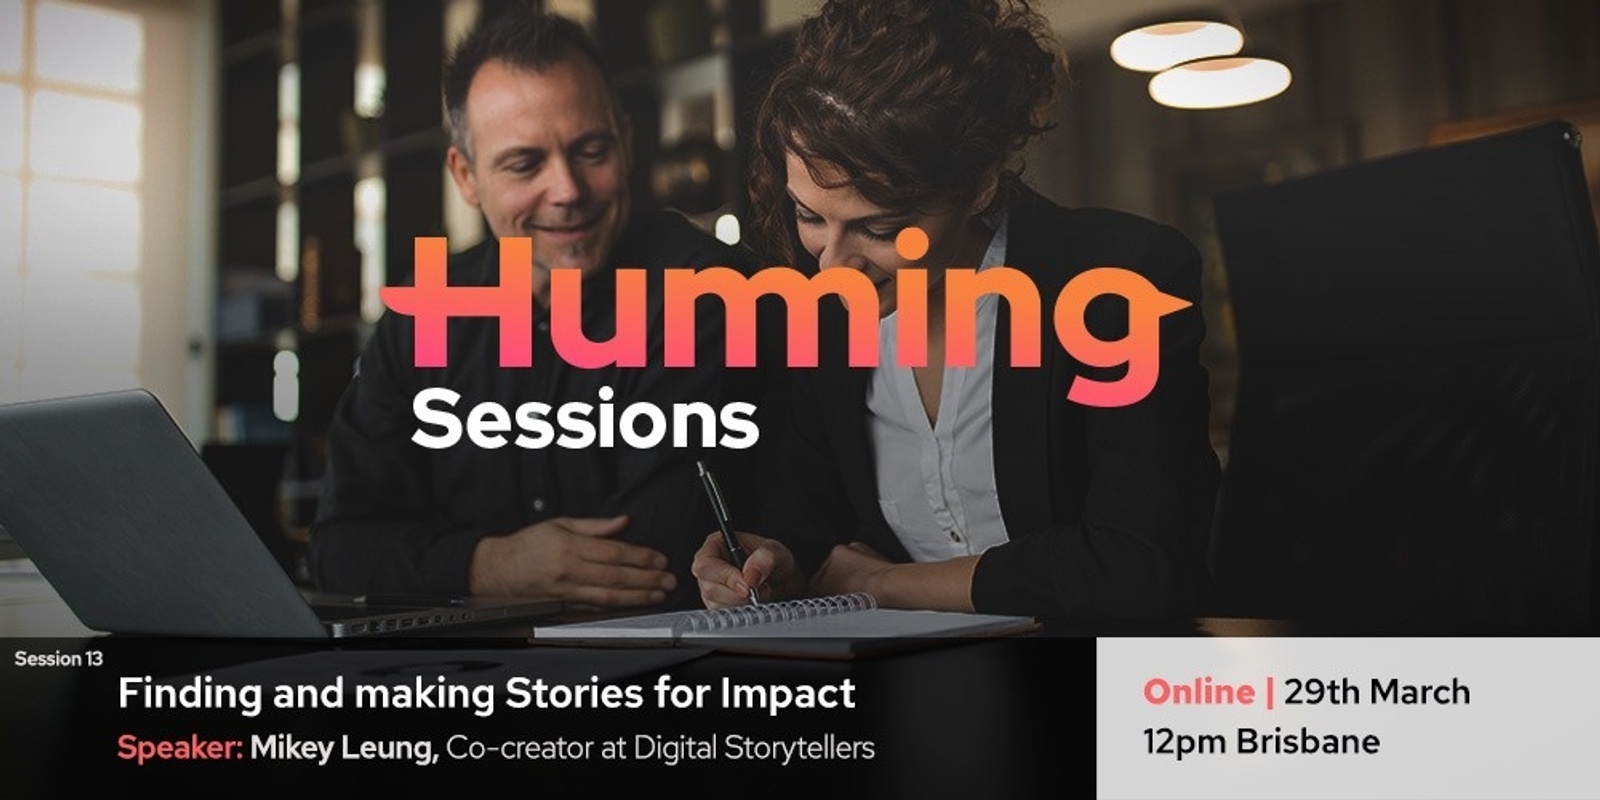 Banner image for Humming Session 13: Finding and making Stories for Impact.